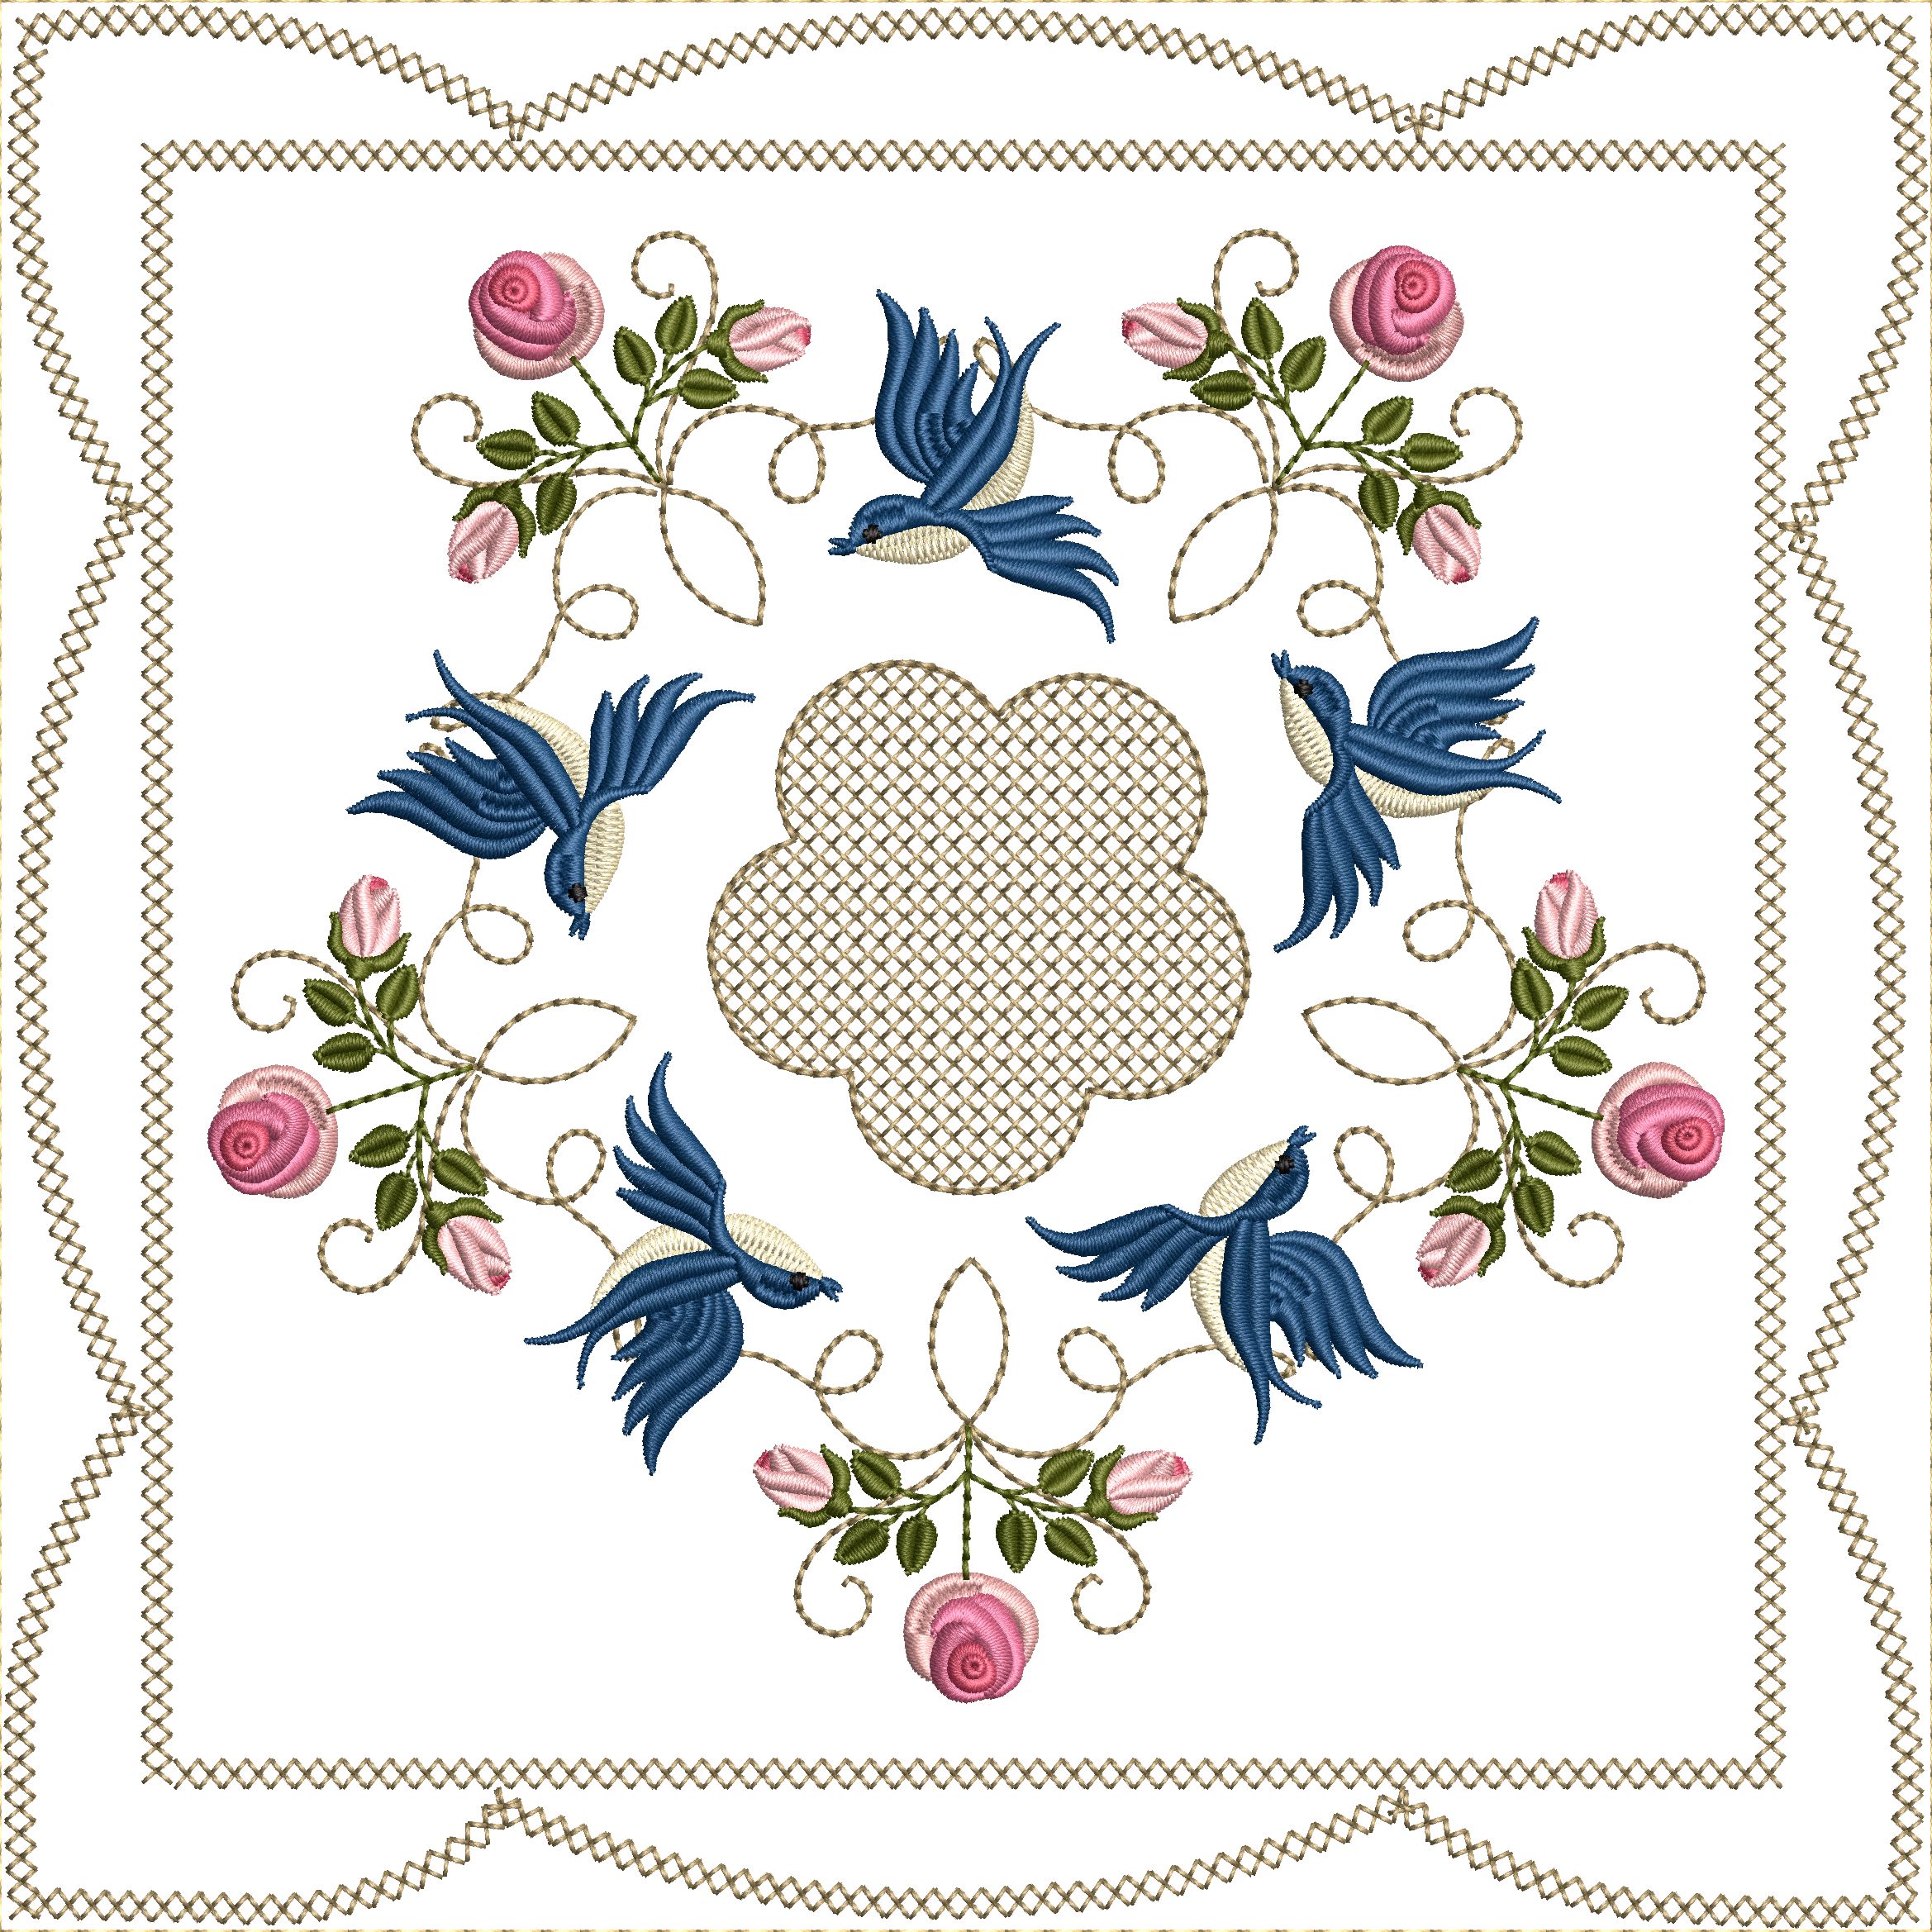 Bluebirds and Roses Quilt Blocks 8x8-14